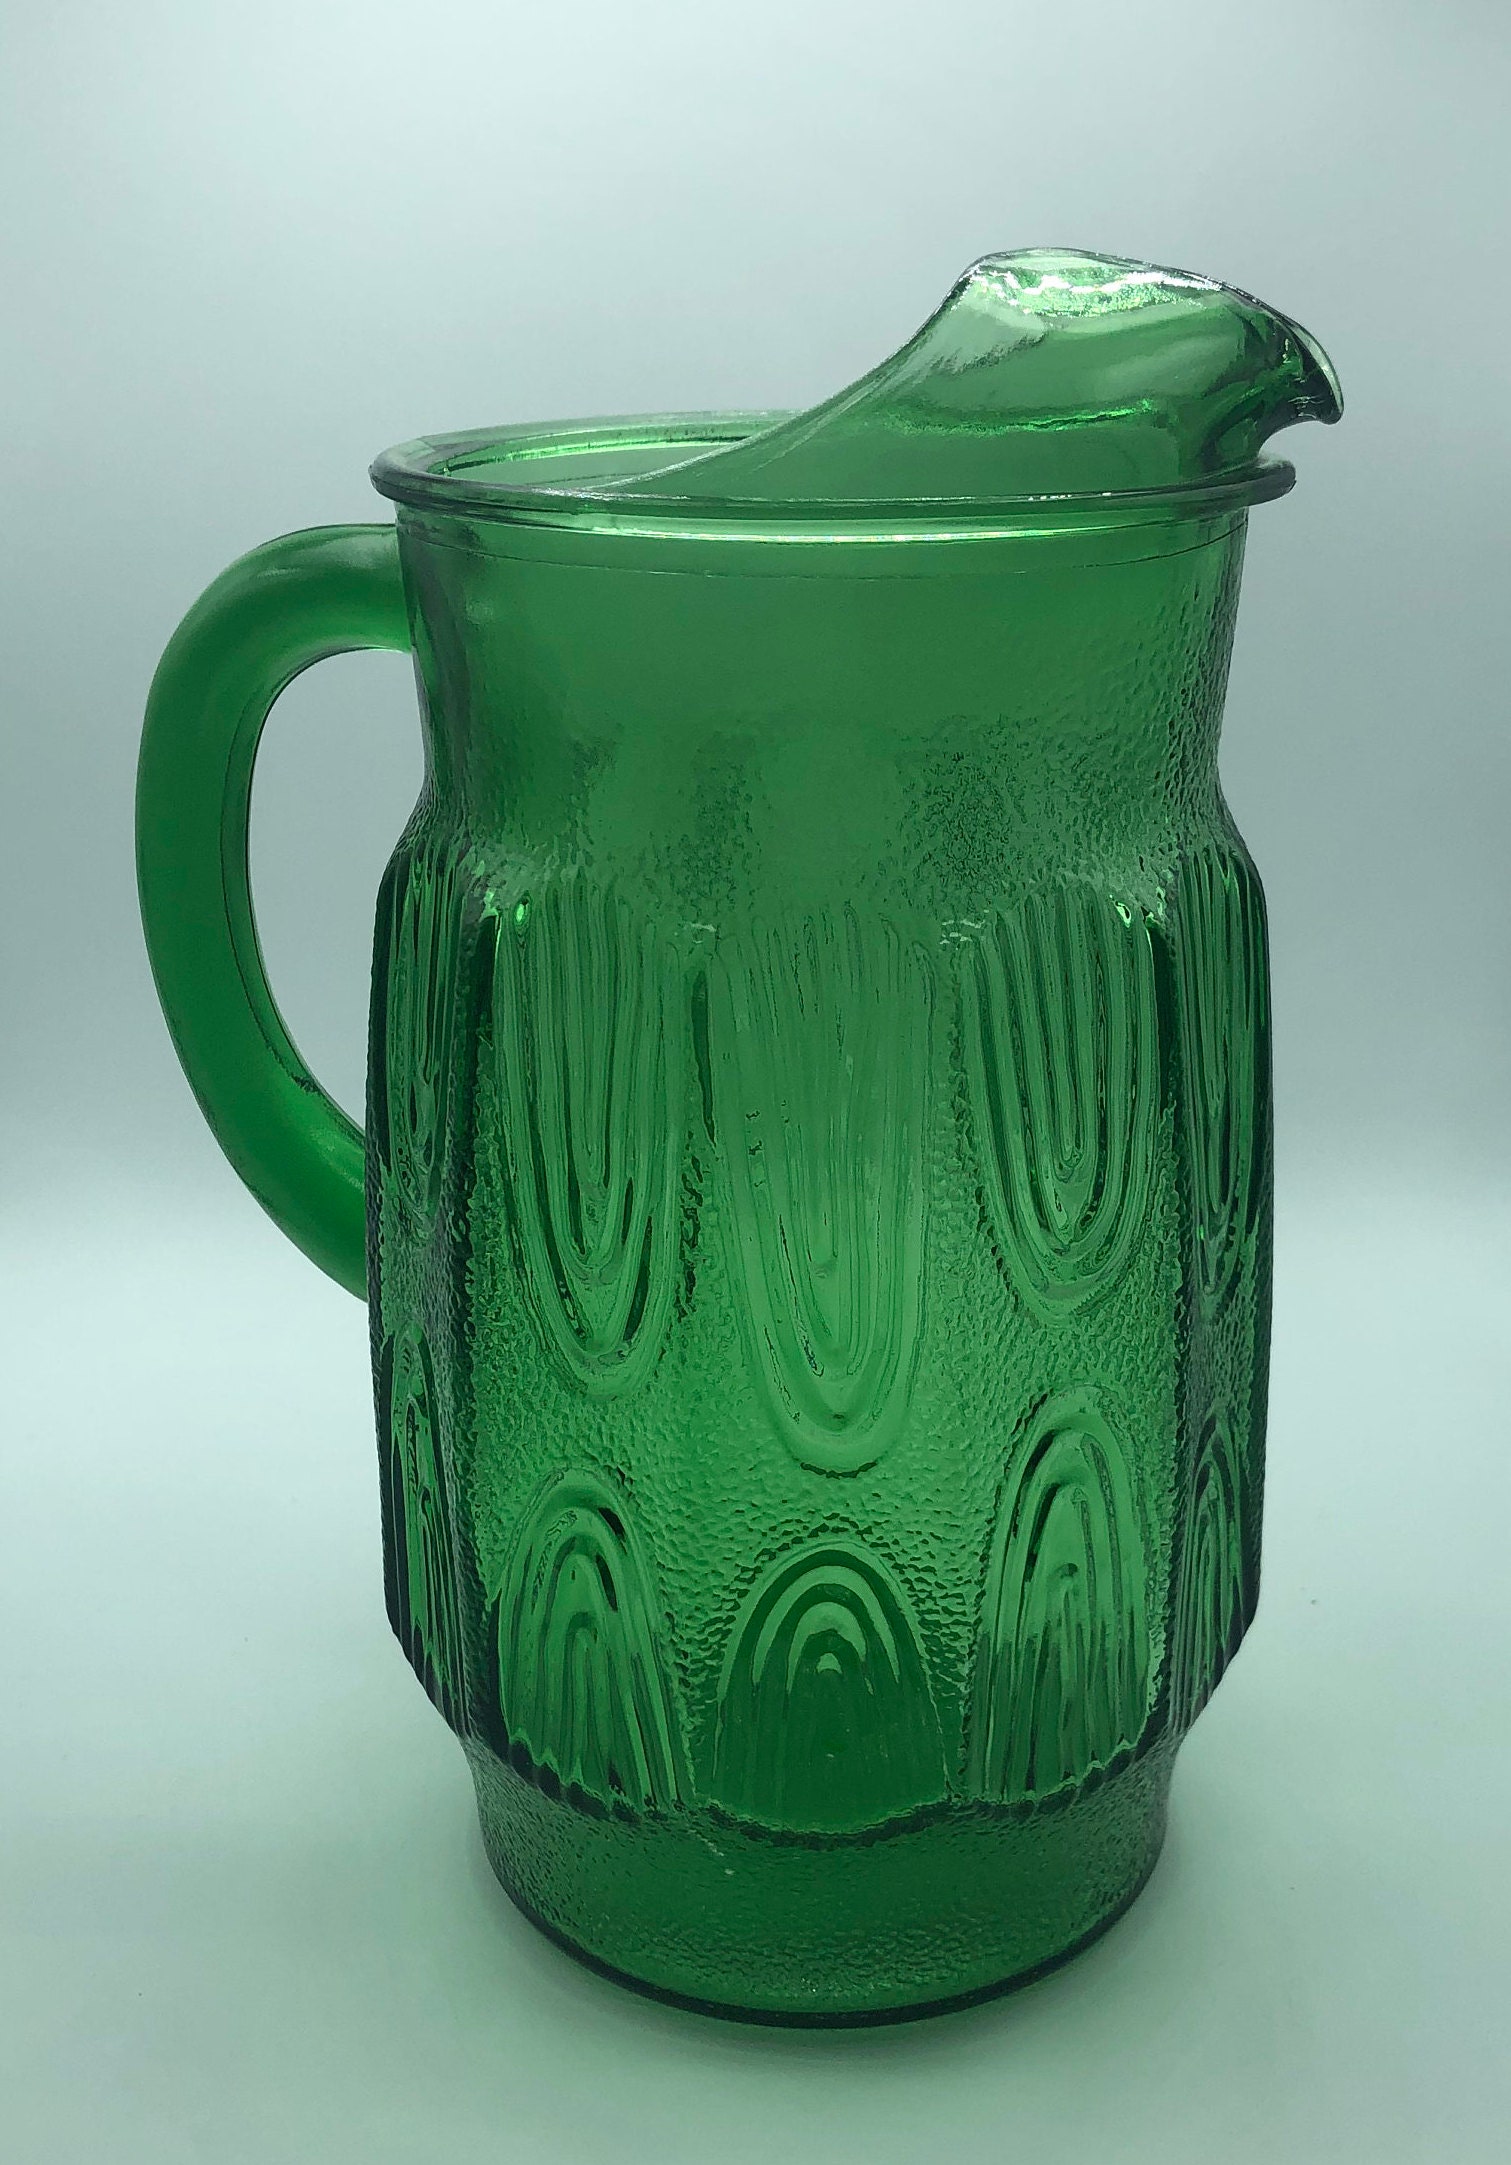 Glass Pitcher Carafe 1970s Peach Green White Bands Juice Carafe Drinks –  Antiques And Teacups